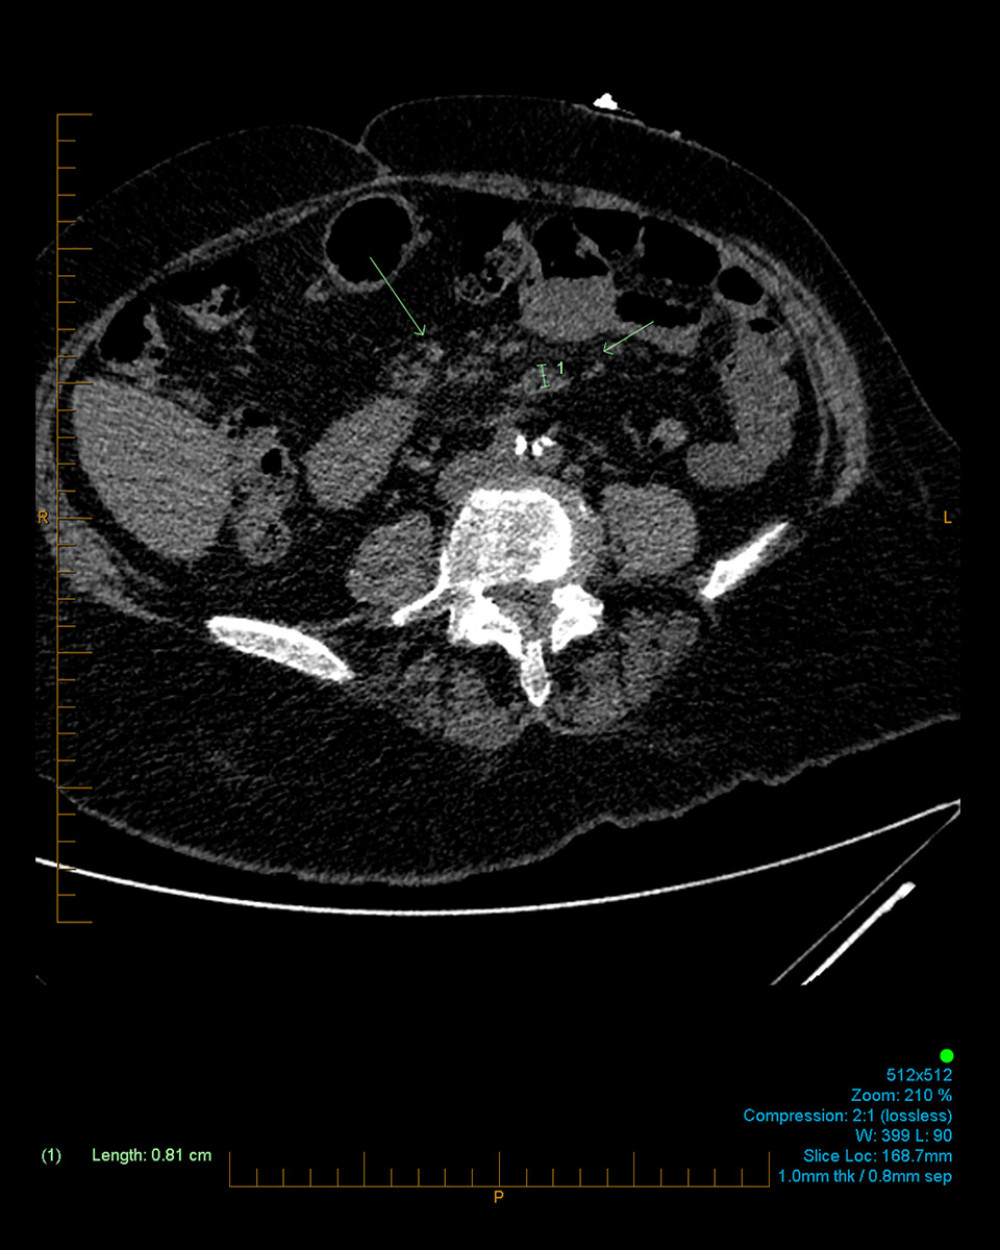 Transverse computed tomography slice showing central mesenteric fat stranding with scattered lymph nodes interspersed in between, measuring up to 8 mm in the short axis, reflective of mesenteric panniculitis, marked by the green arrows.